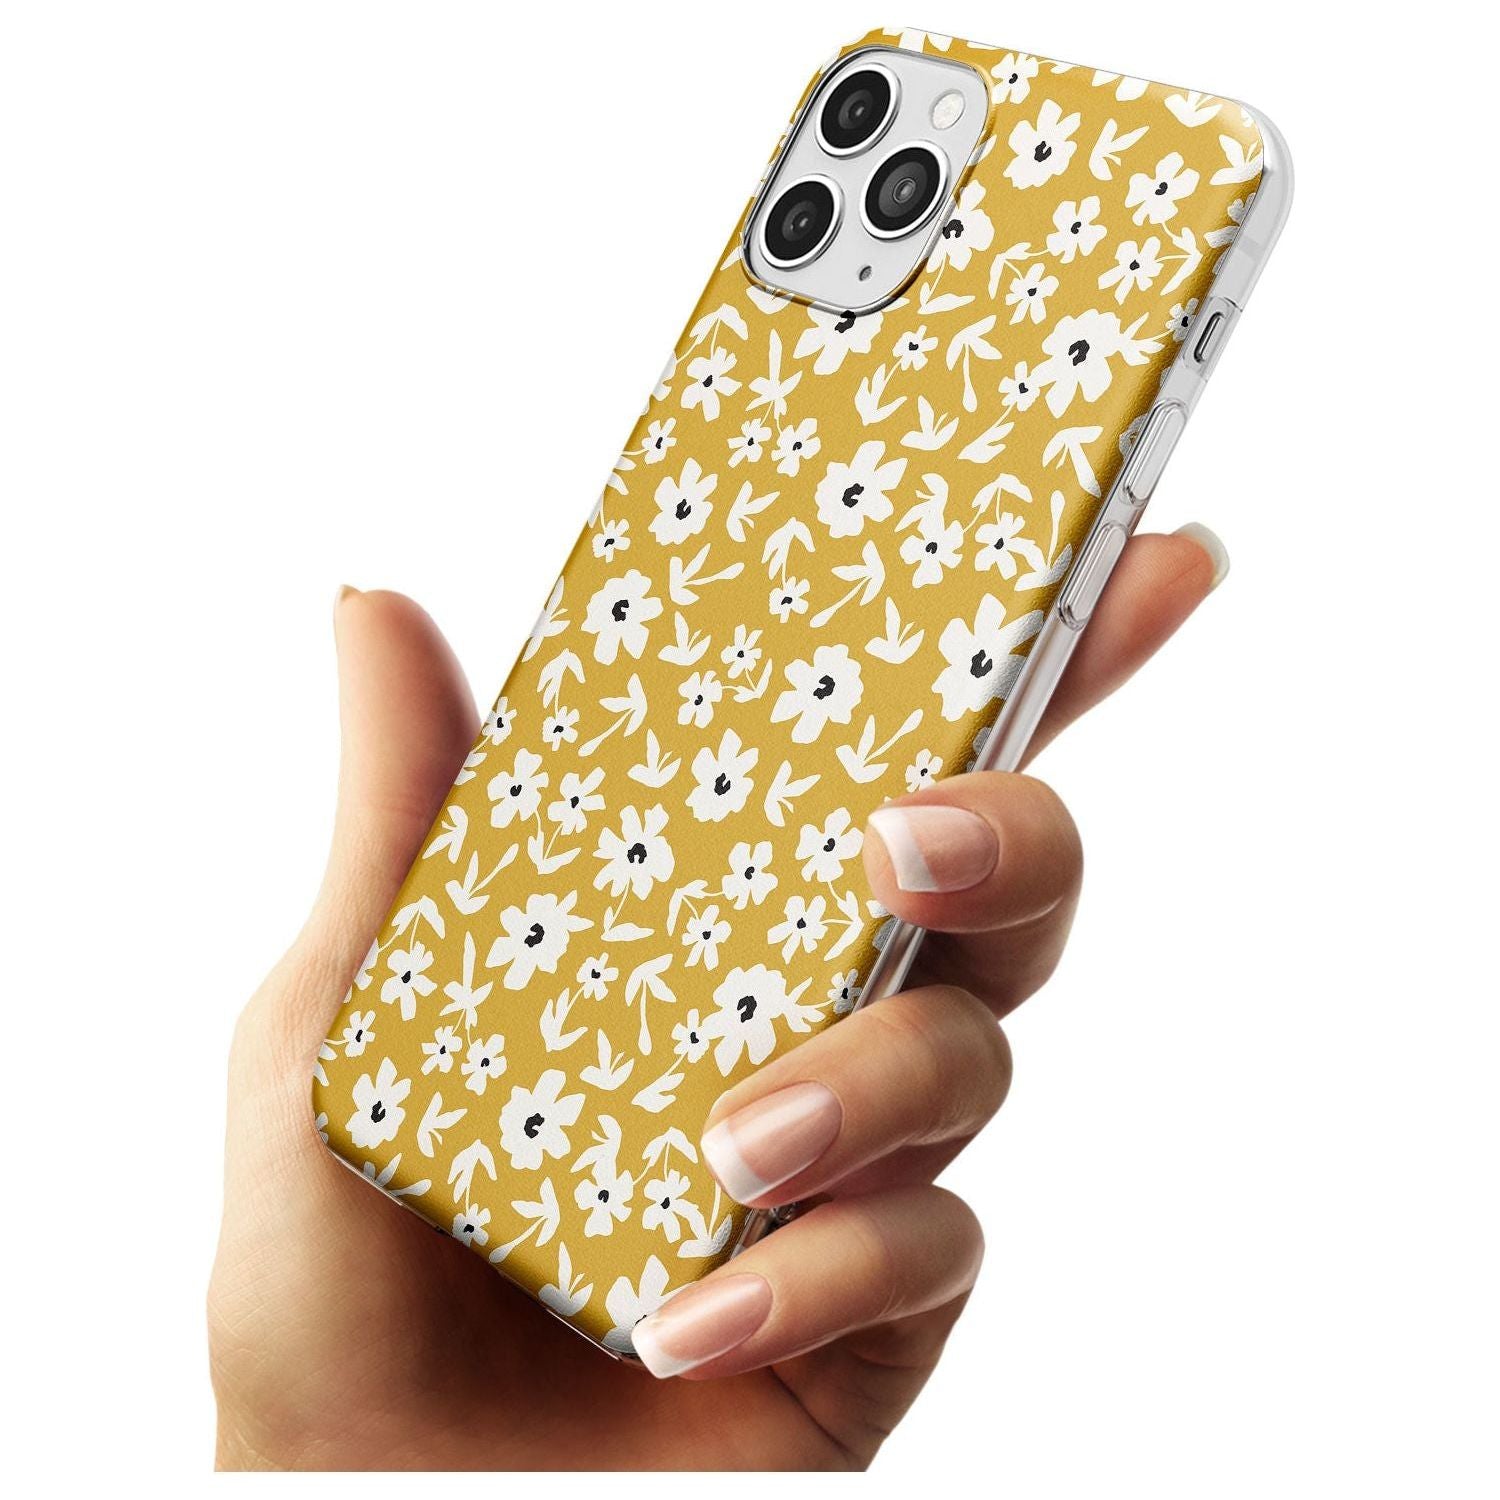 Floral Print on Mustard - Cute Floral Design Black Impact Phone Case for iPhone 11 Pro Max